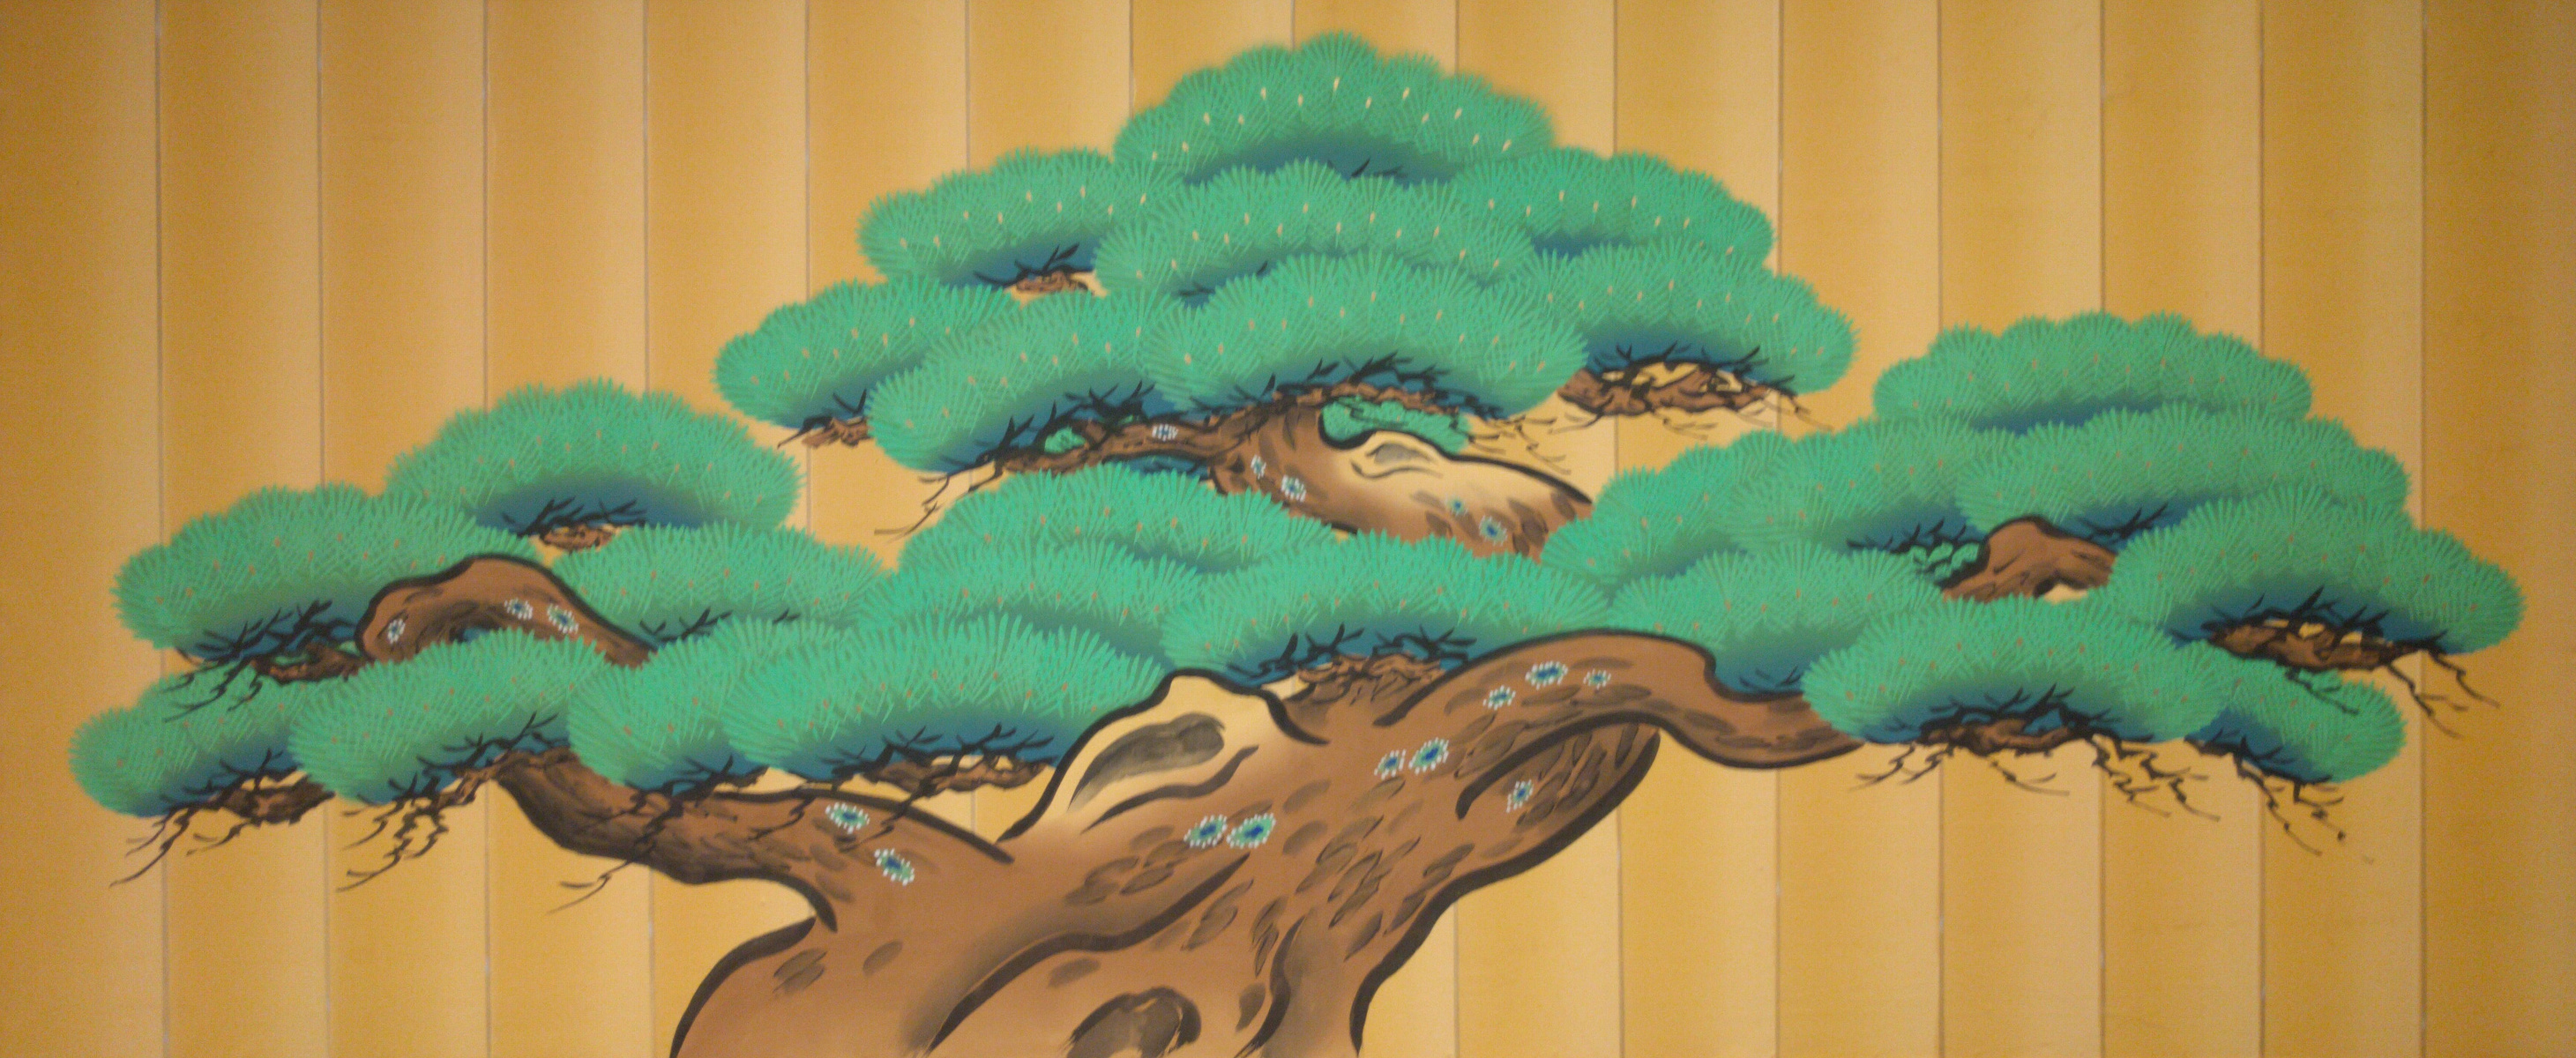 the top of a bonsai tree painted on a garage door